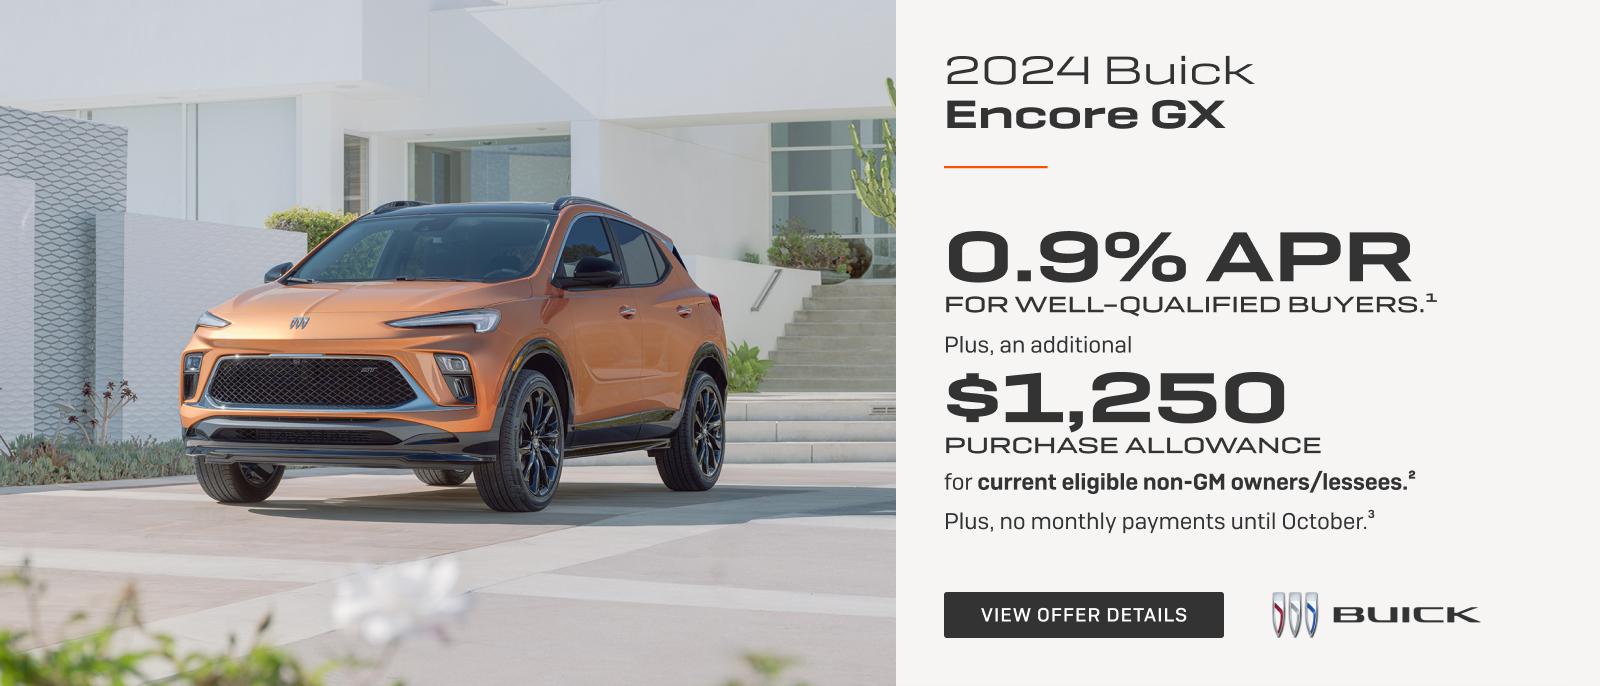 0.9% APR 
FOR WELL-QUALIFIED BUYERS.1

Plus, an additional $1,250 PURCHASE ALLOWANCE for current eligible non-GM owners/lessees.2

Plus, no monthly payments until October. 3